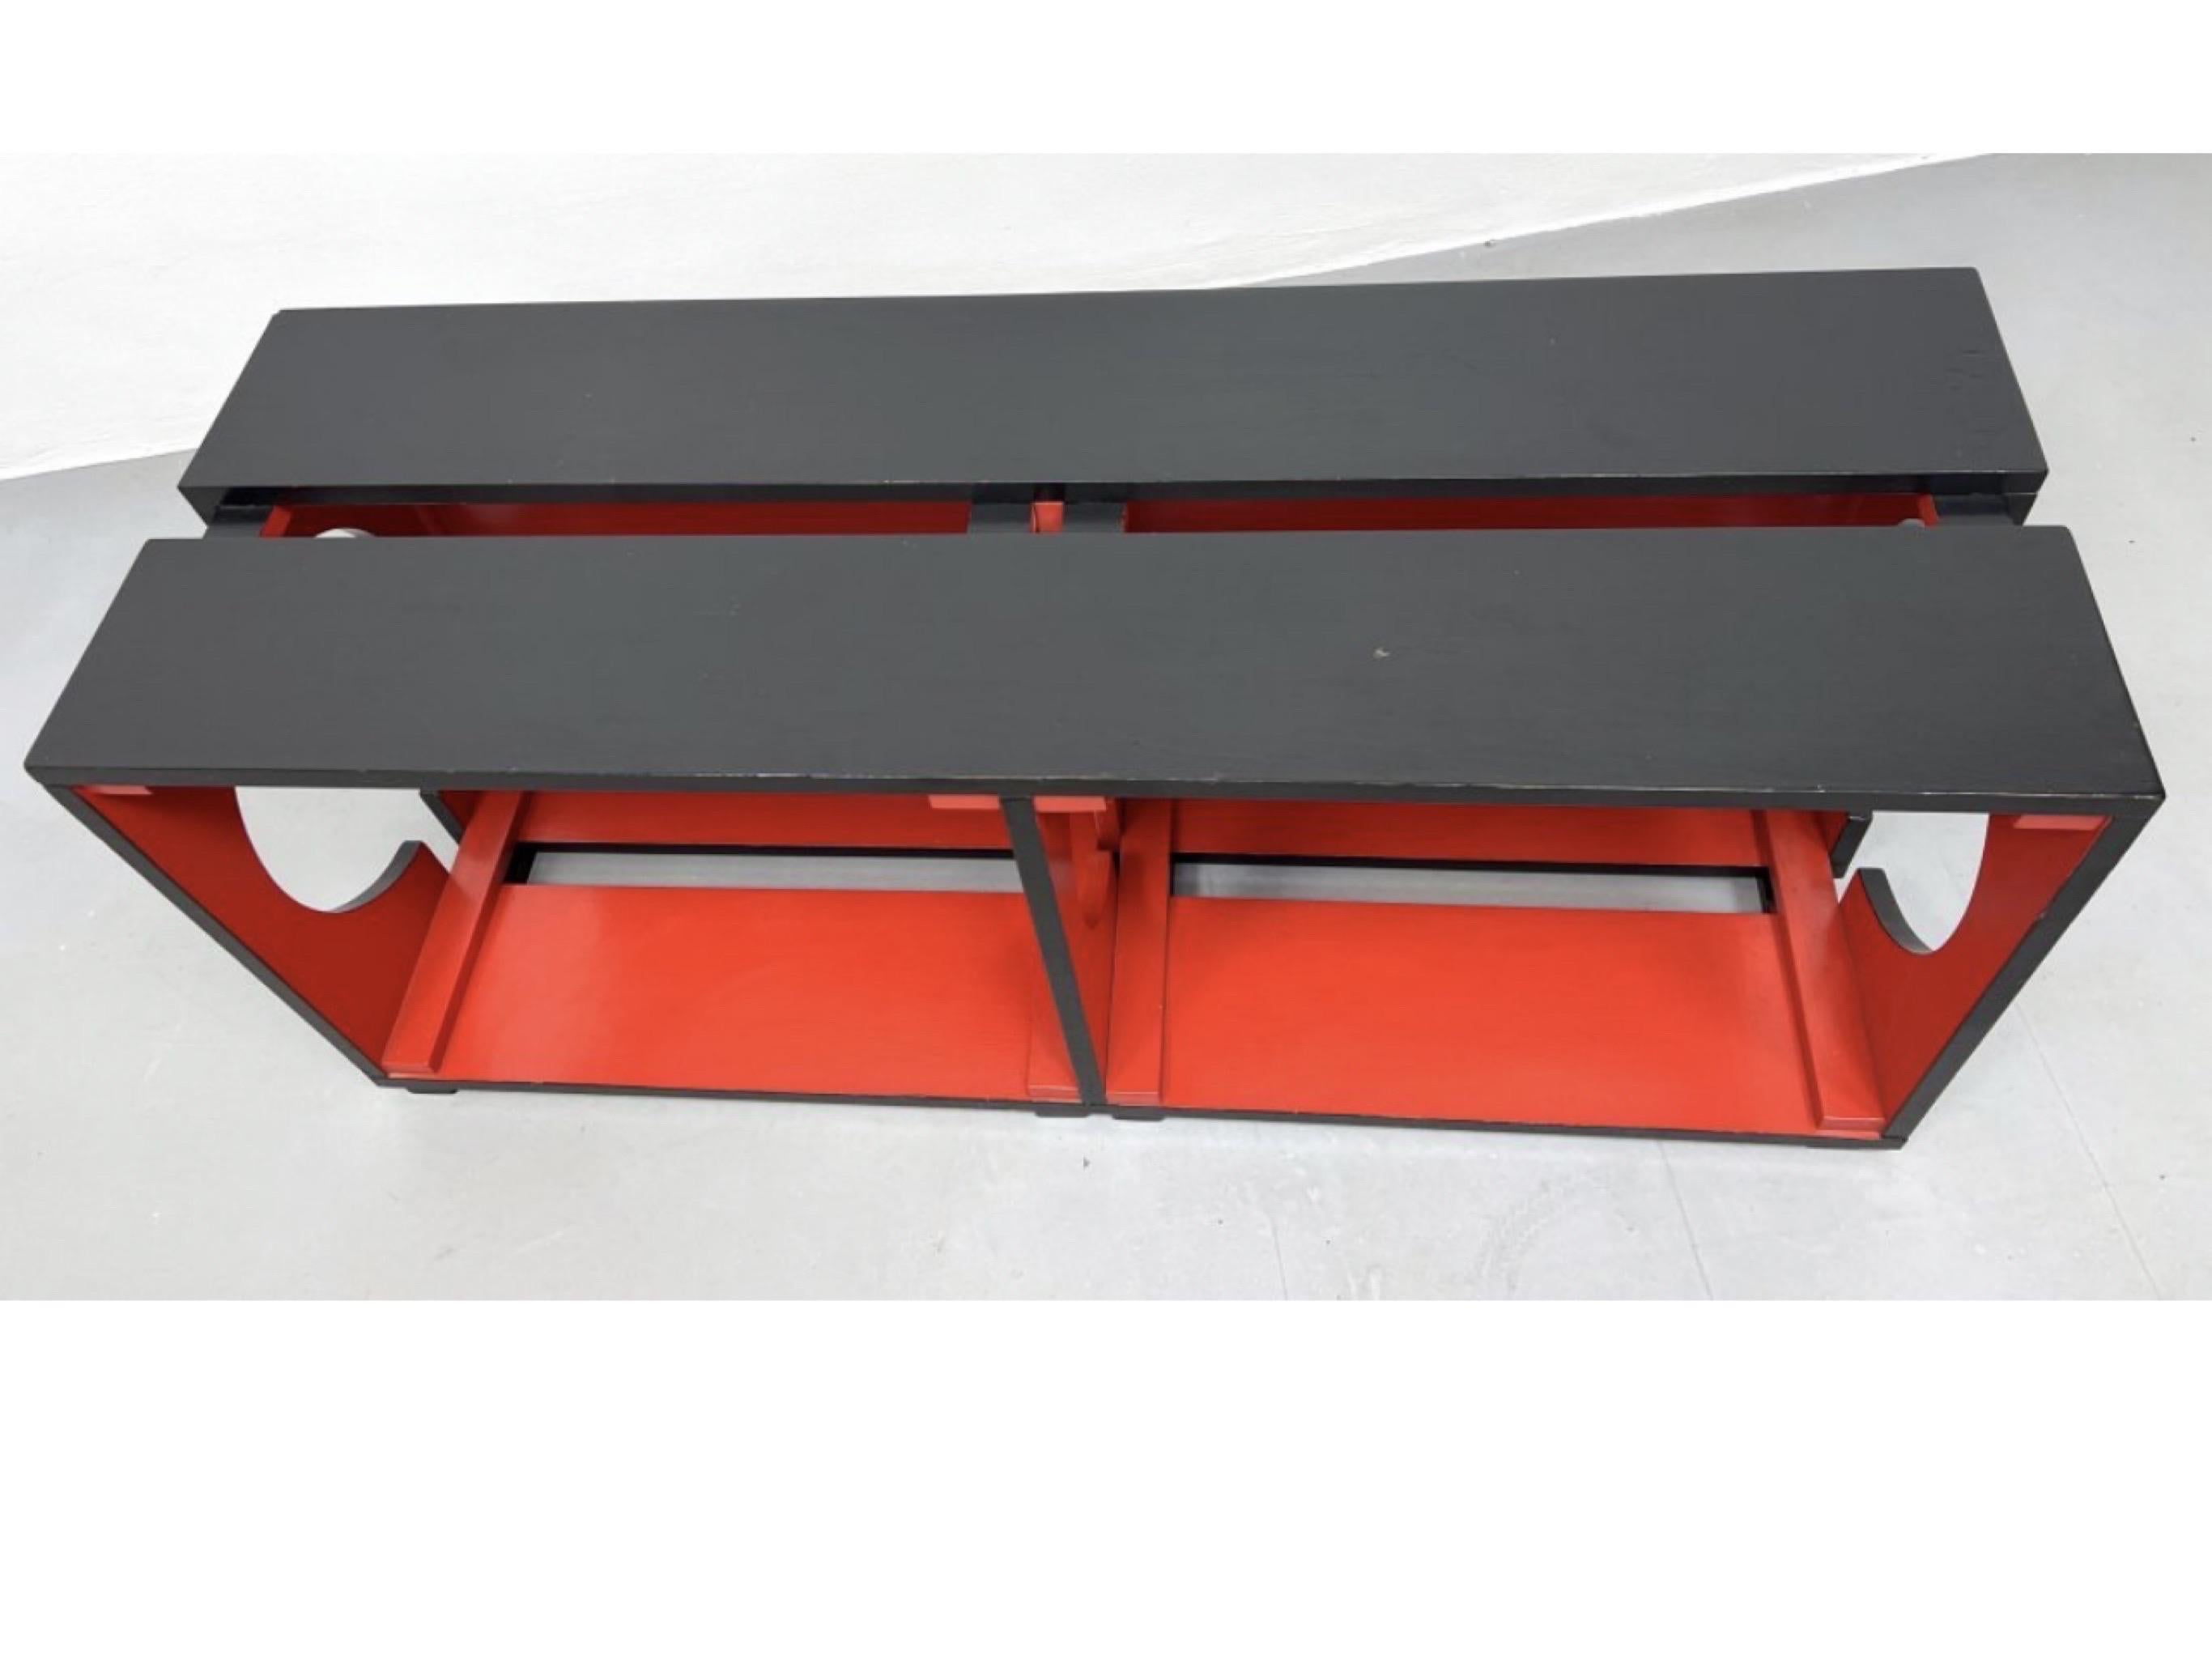 Postmodern De Stijl style low console. This would look great mounted as a floating console, on the floor, or sitting on top of a taller console. 

De Stijl style low console table. Red and black. Dimensions: H: 19.5 inches: W: 48 inches: D: 16.5